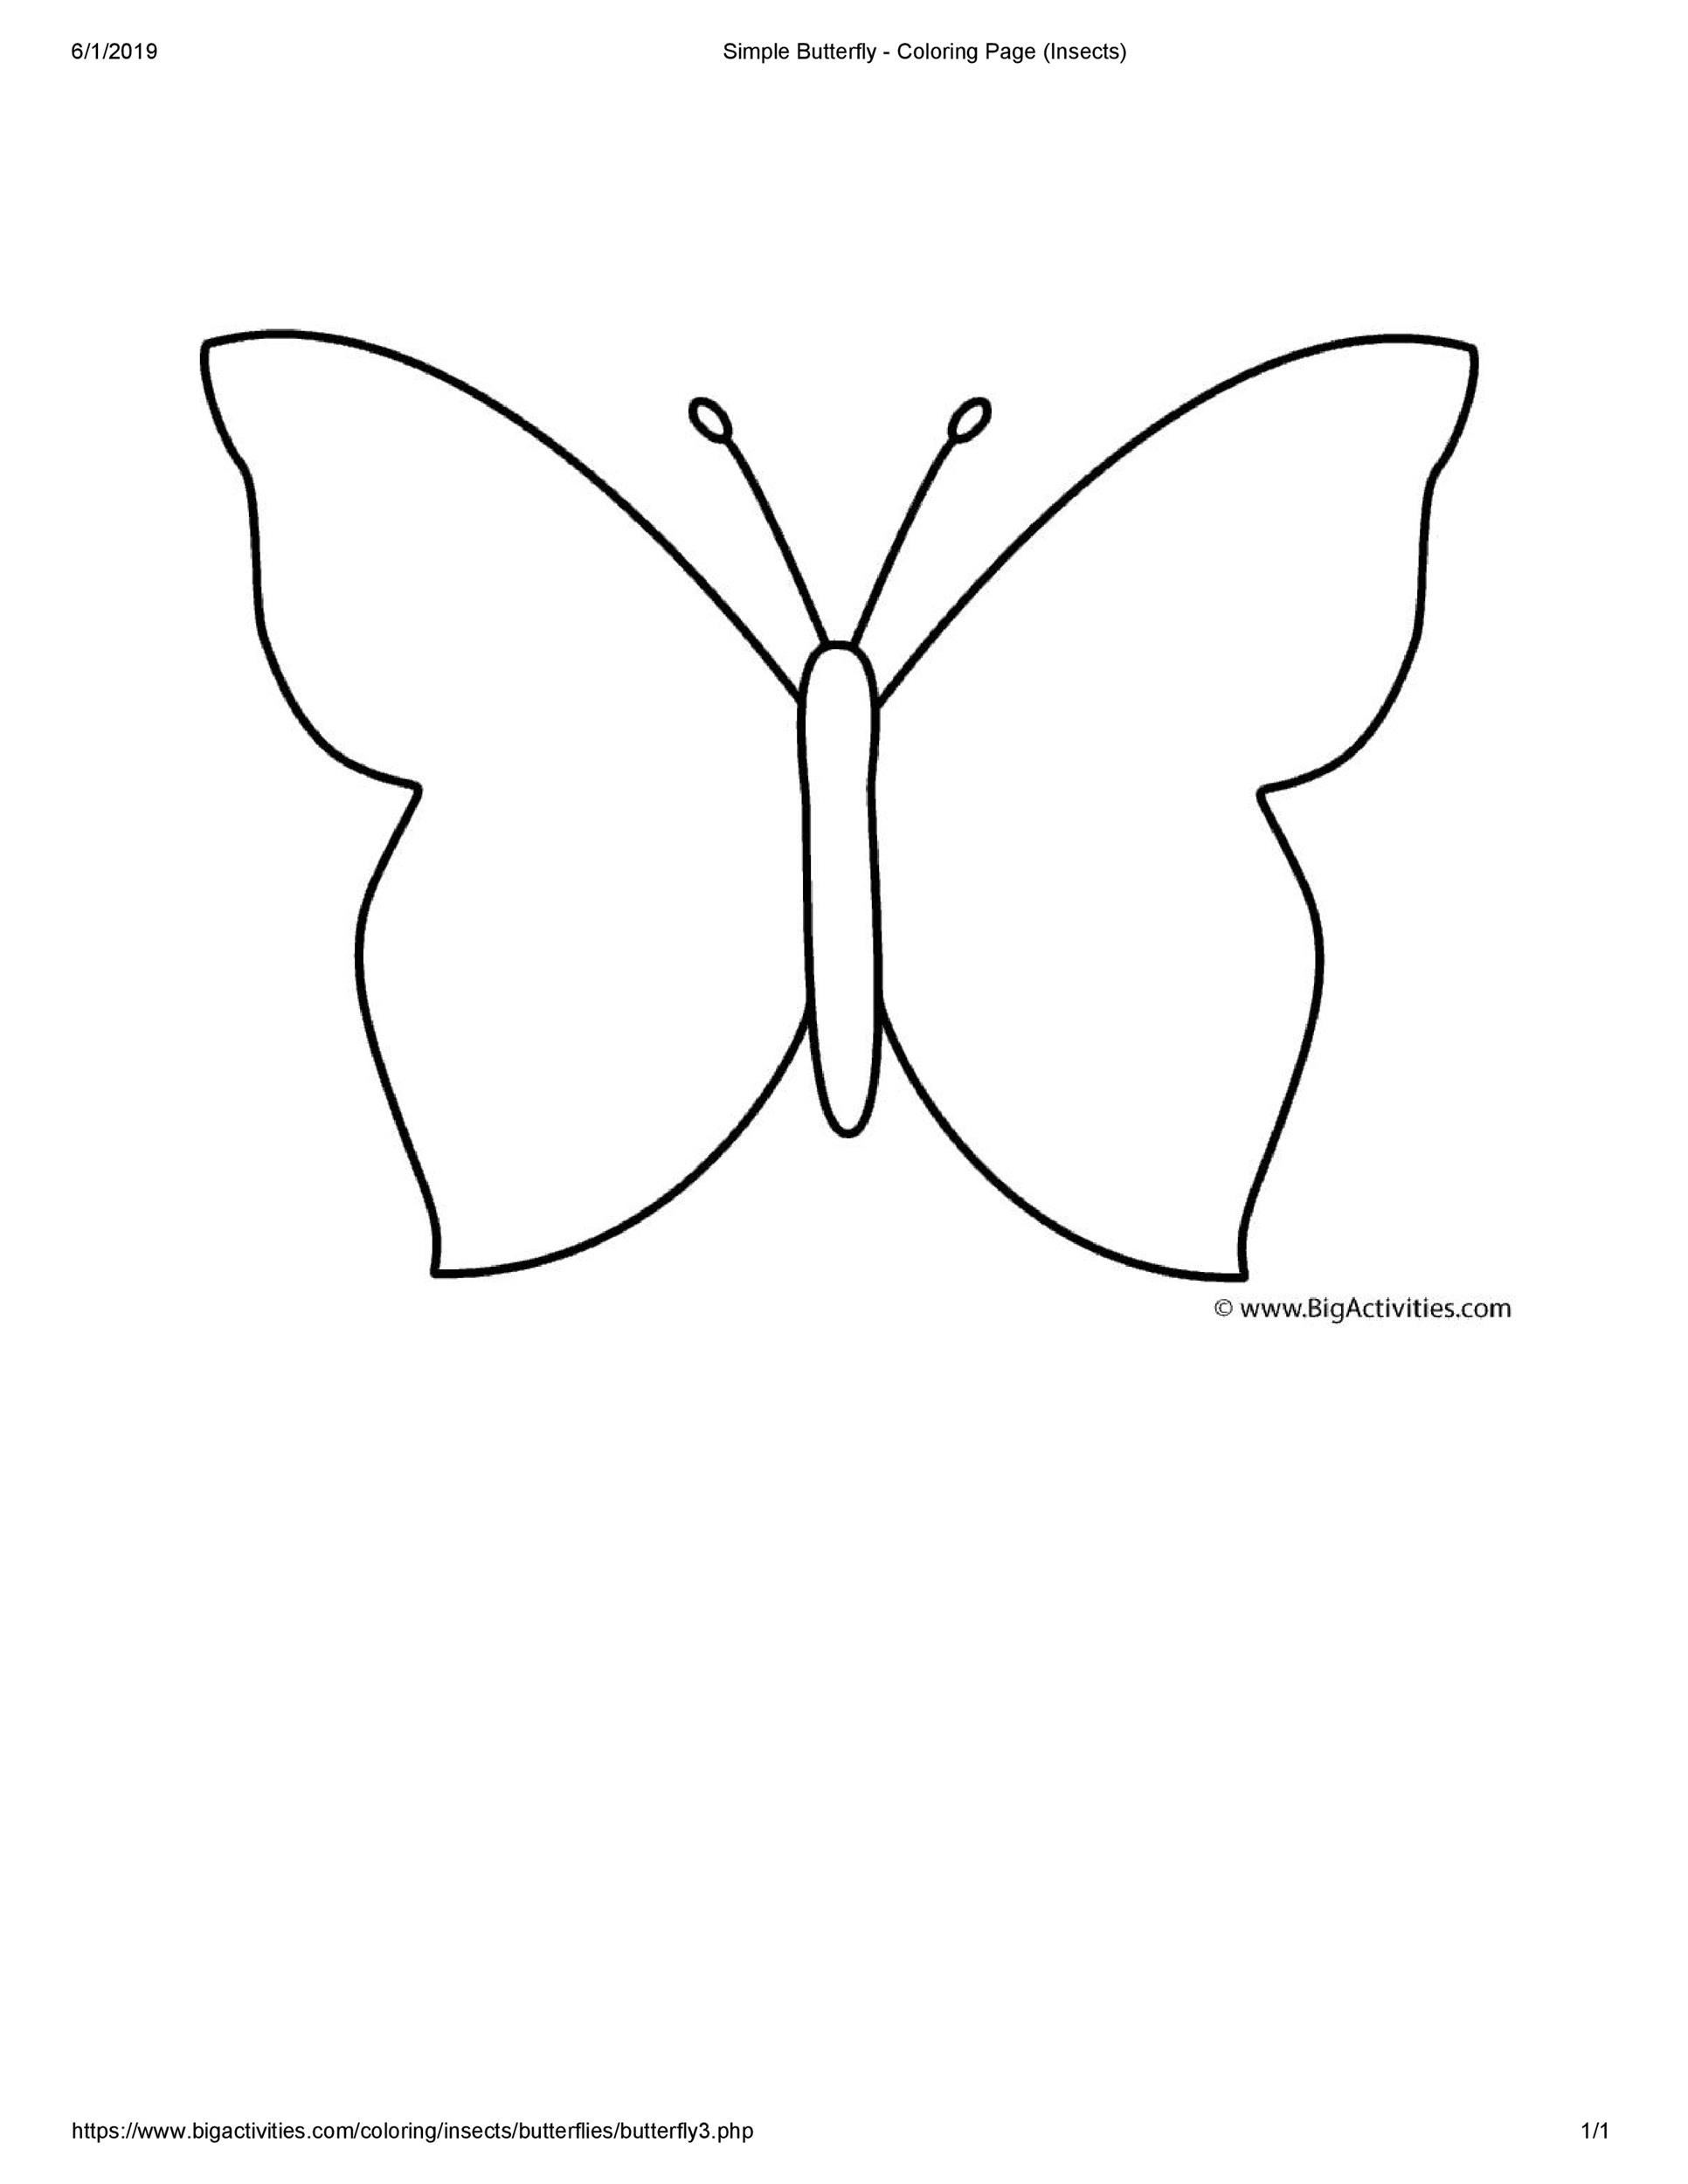 50 Printable Cut Out Butterfly Templates ᐅ TemplateLab